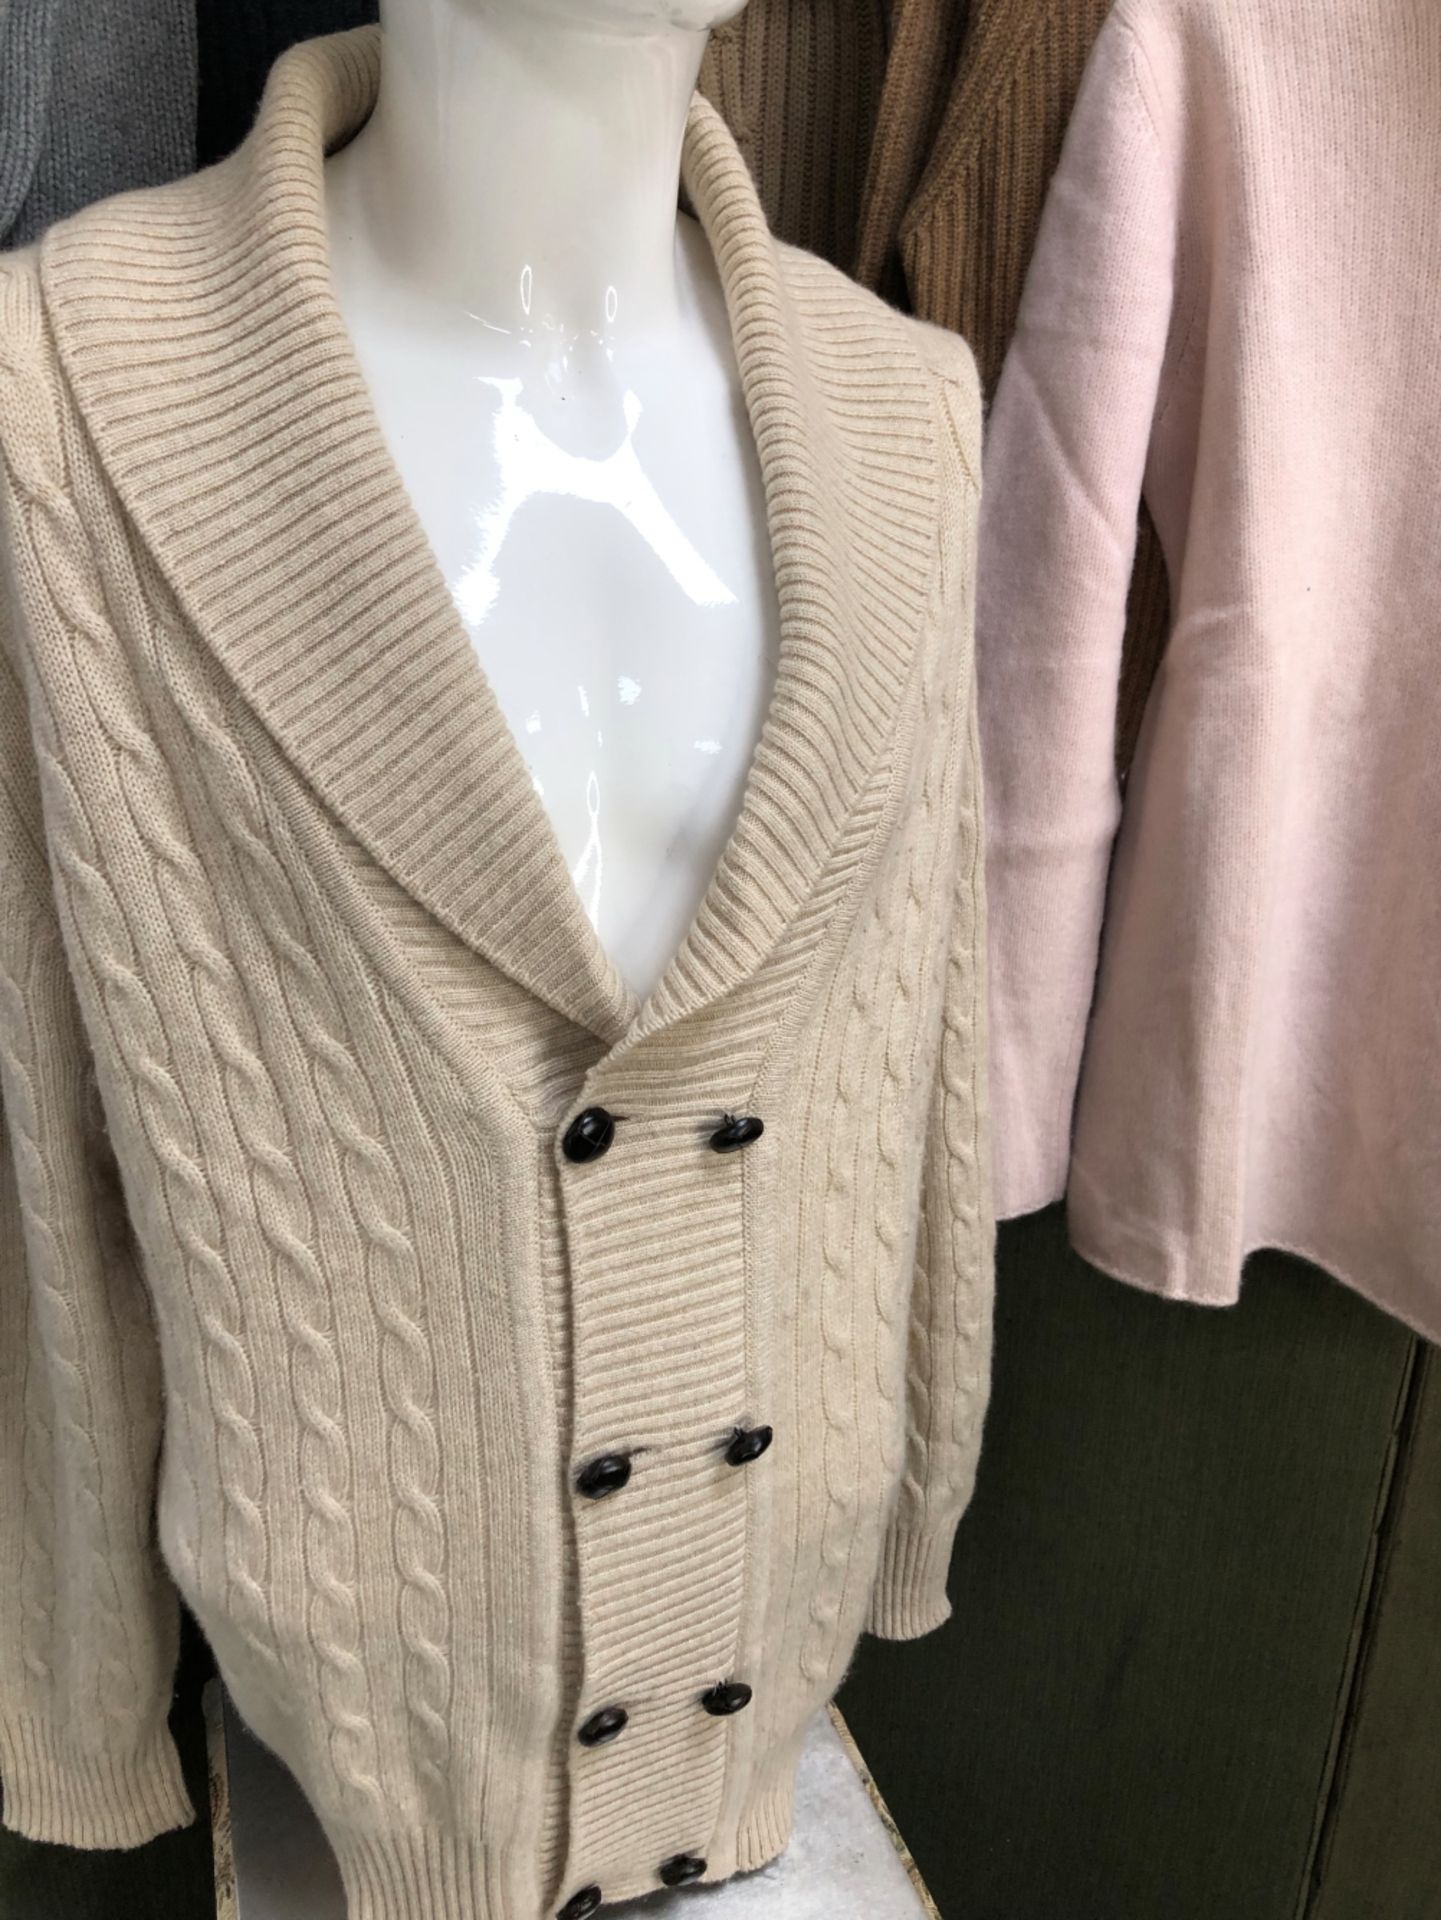 A JOHNSTONS CASHMERE 44" CABLE KNIT CARDIGAN, A KNITTED CARDIGAN WITH NECK TIE, A TSE CASHMERE - Image 2 of 16